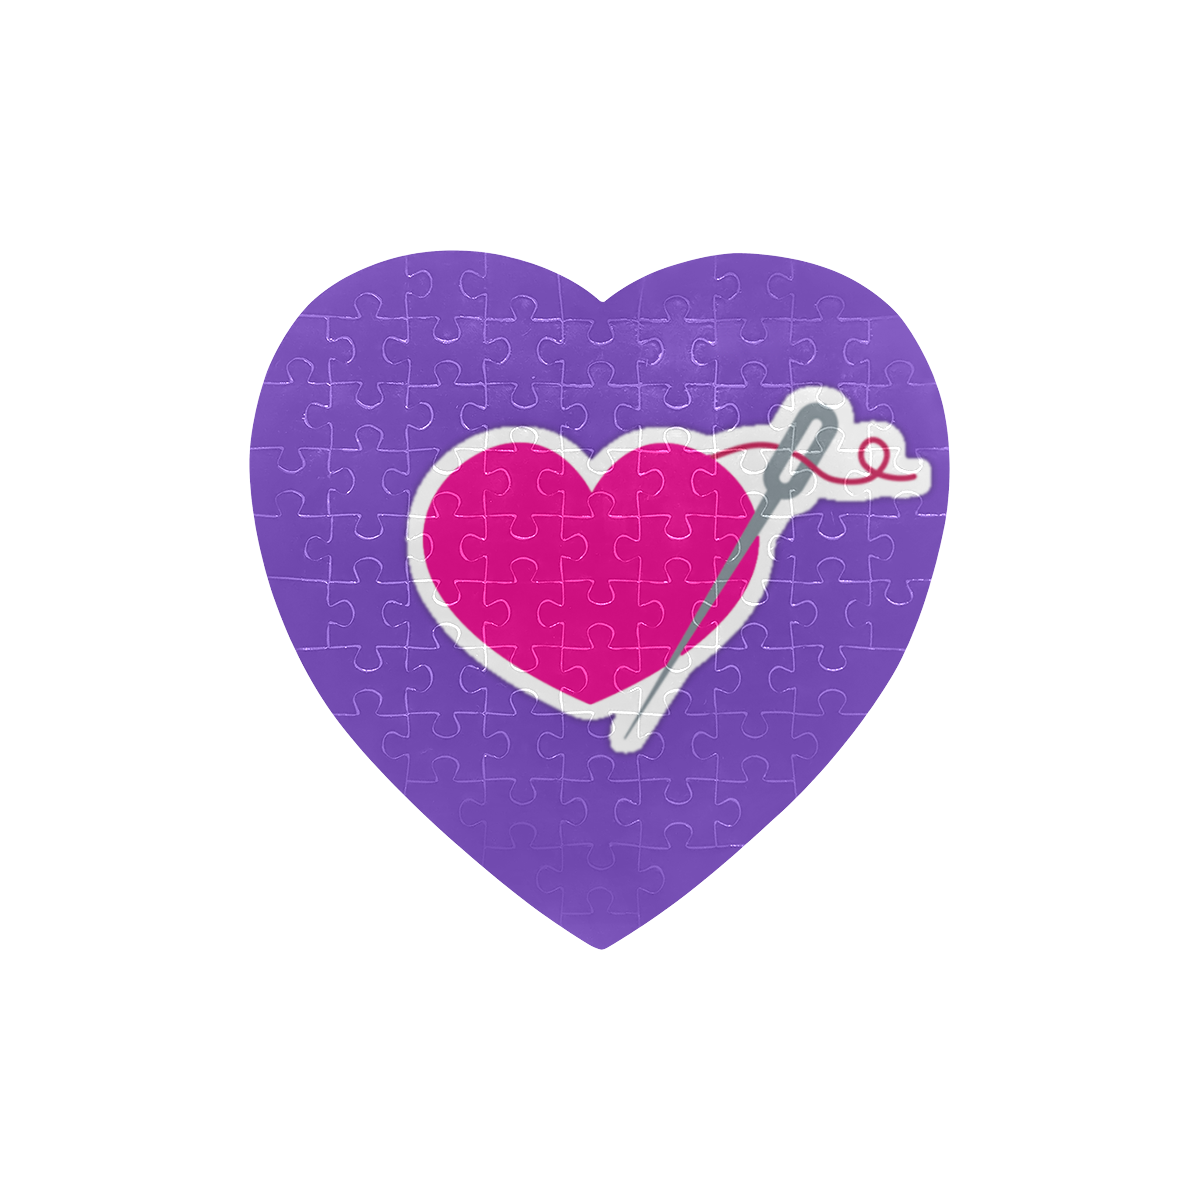 HEART AND NEEDLE PUZZLE